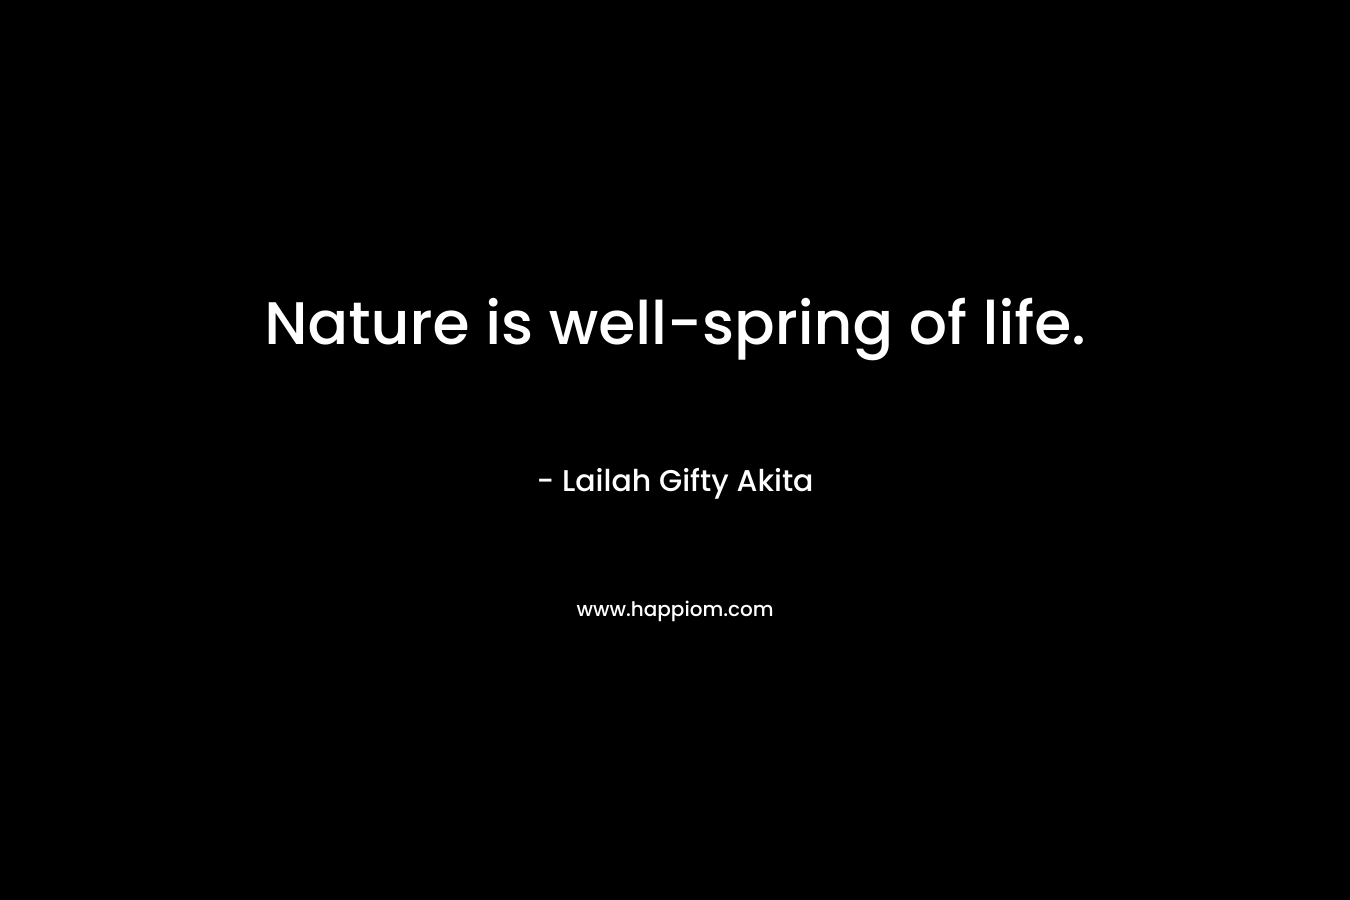 Nature is well-spring of life. – Lailah Gifty Akita